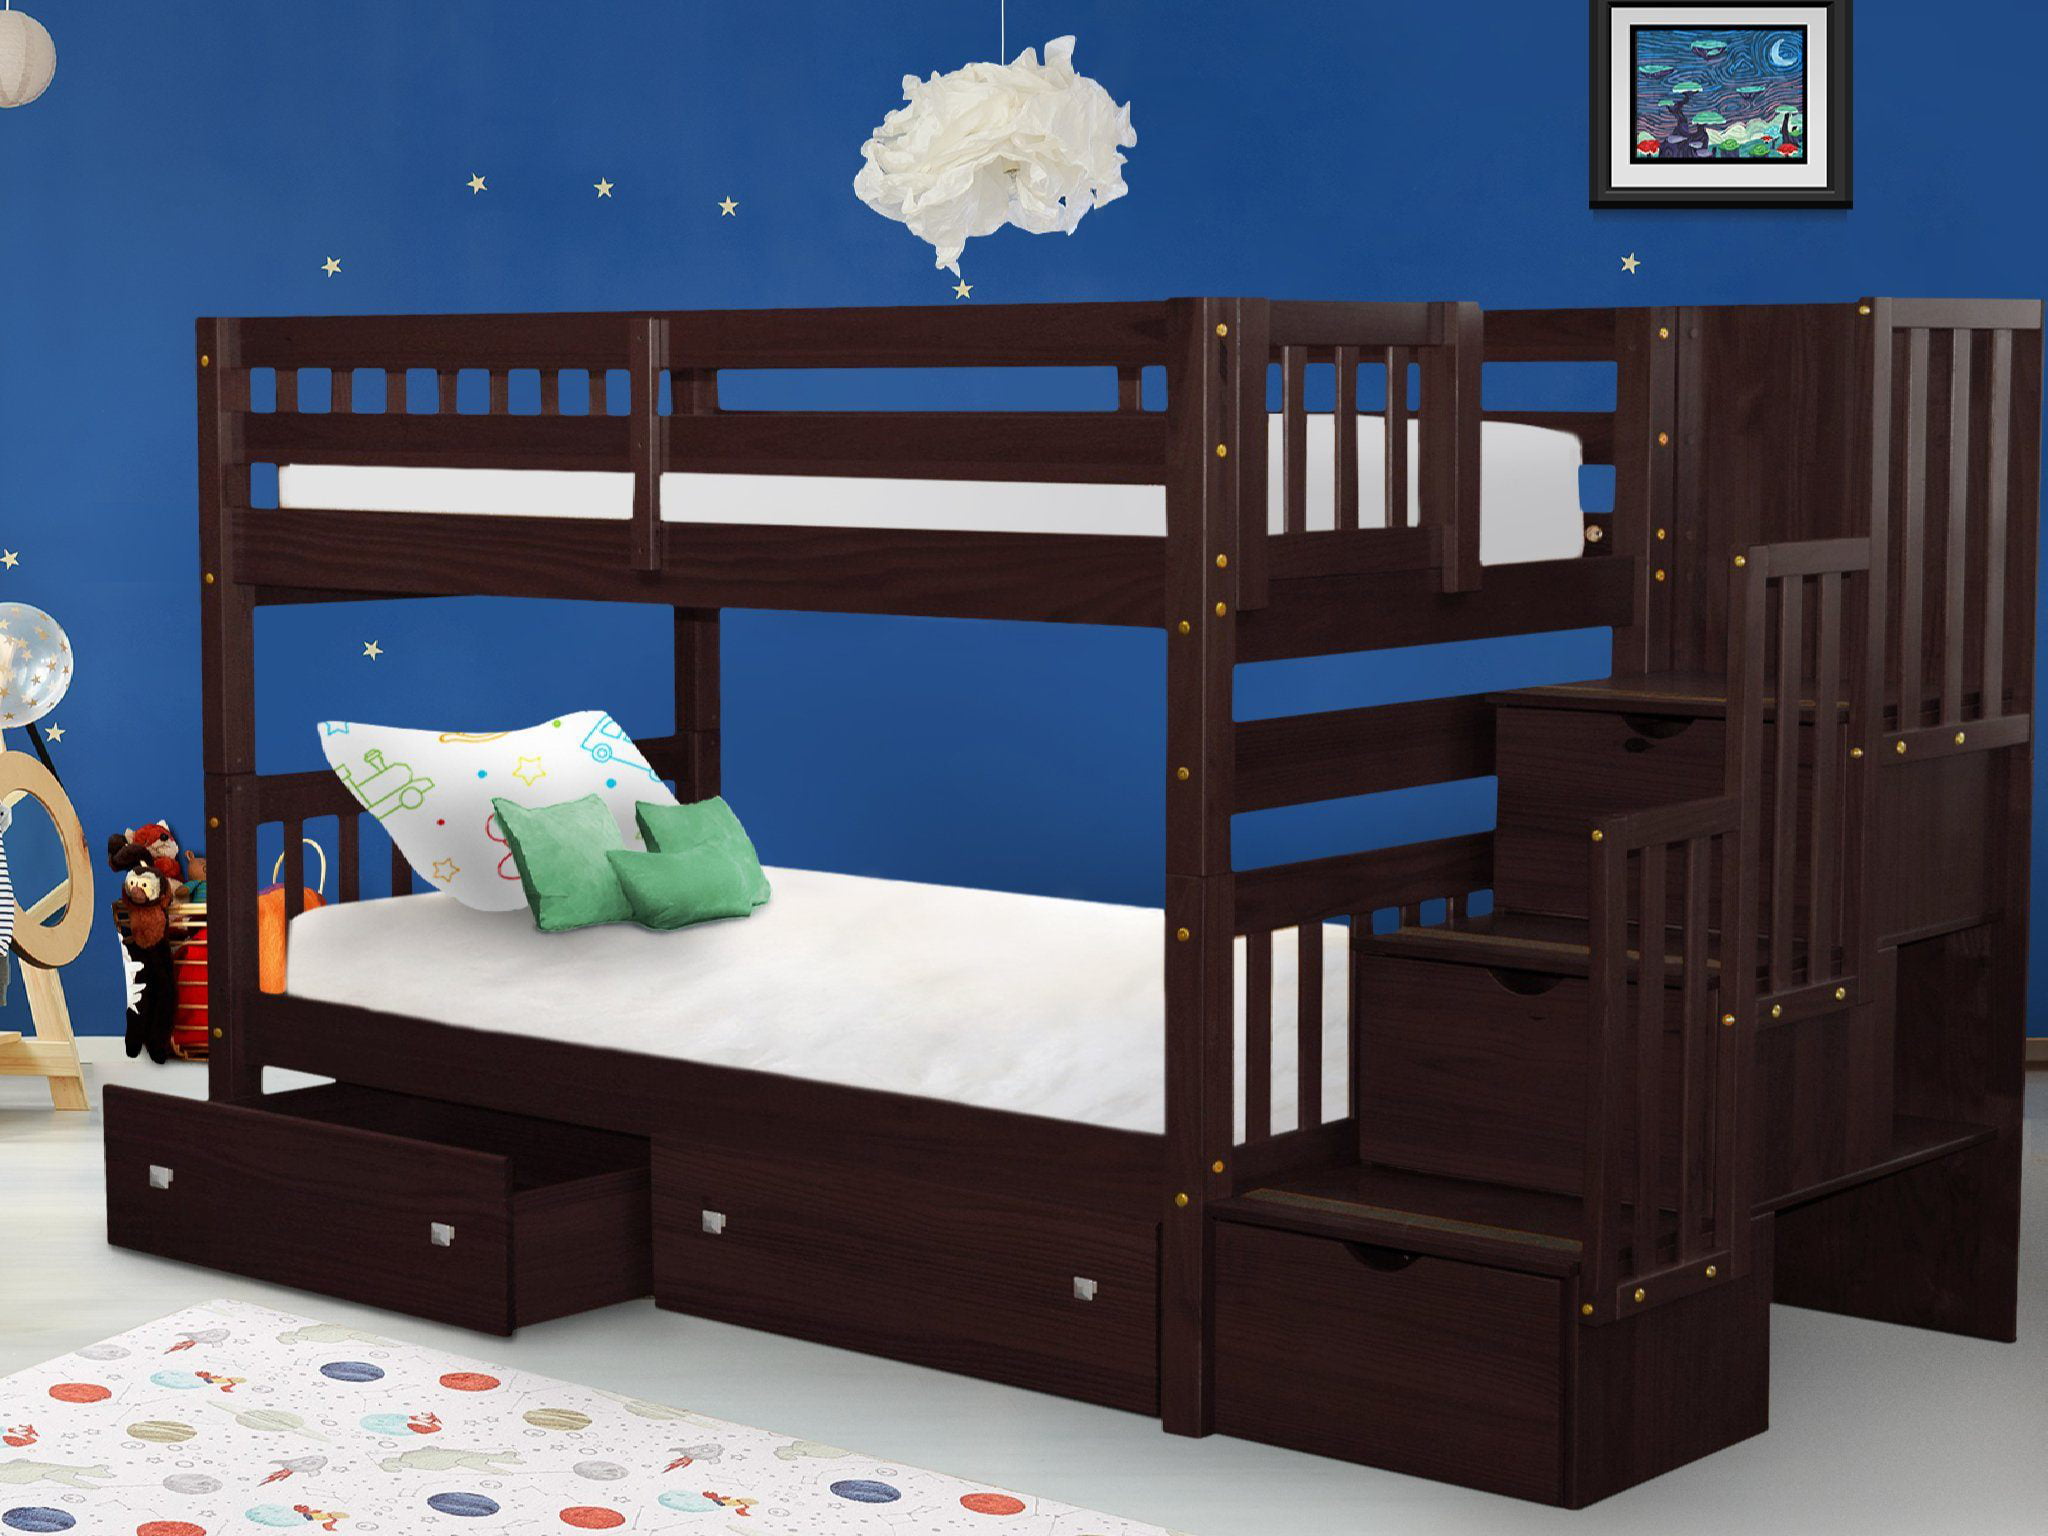 Bedz King Stairway Bunk Beds Twin over Twin with 3 Drawers in the Steps